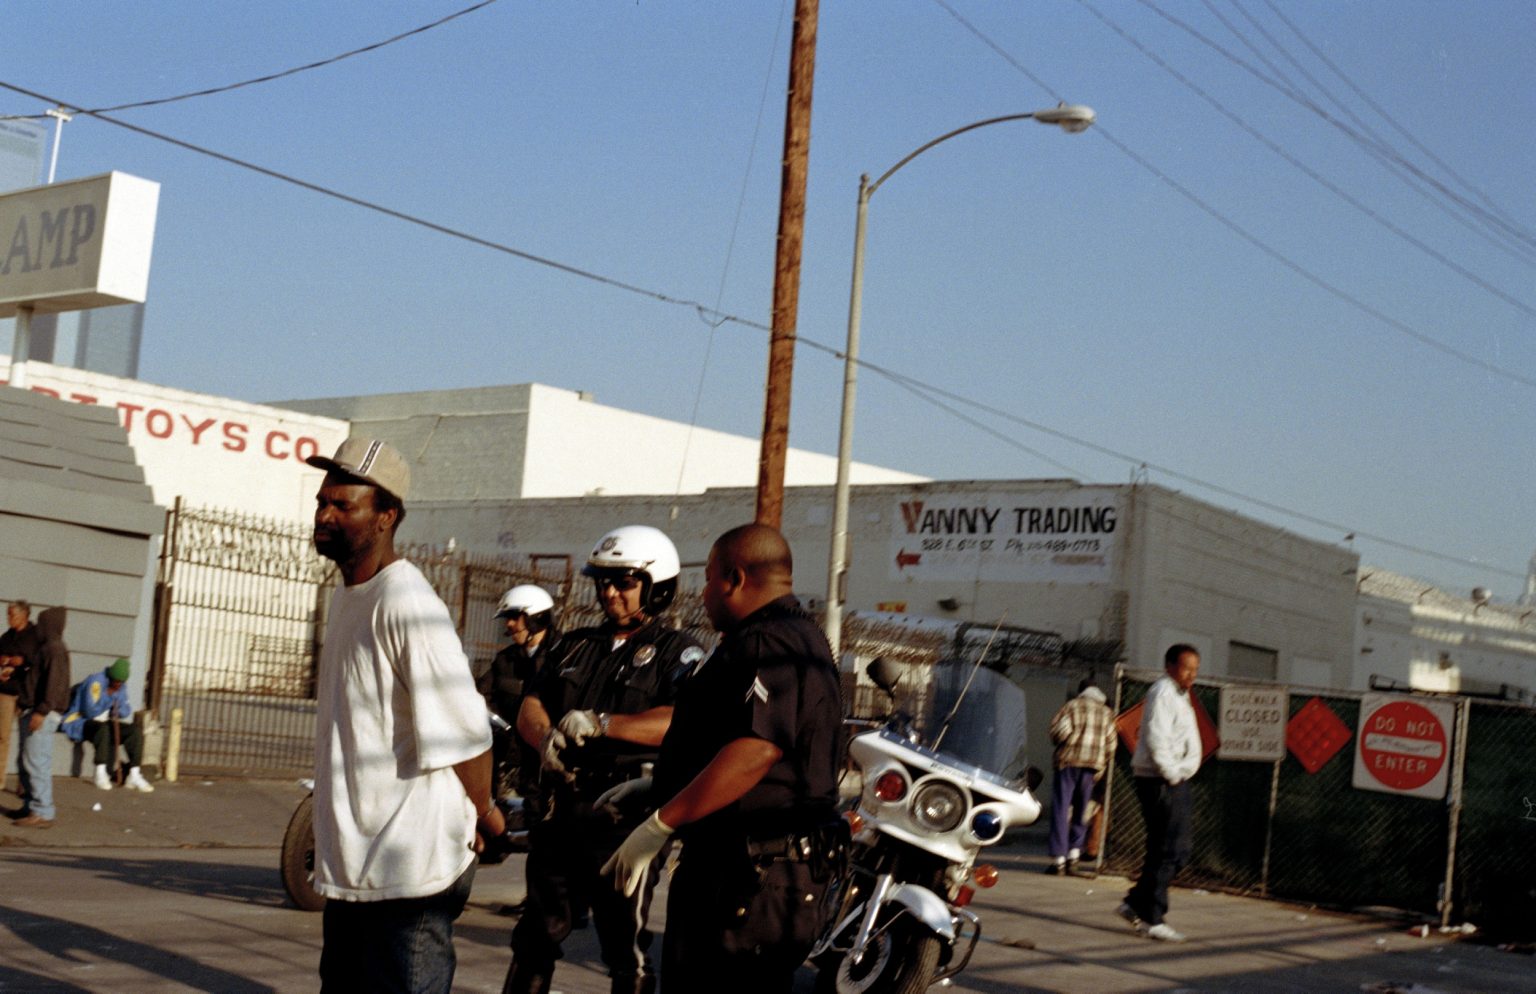 Los Angeles 2004 - Skid Row  - Man being arrested by the LAPD, San Julian street
><
Los Angeles 2004 - Skid Row - San Julian street - Durante un arresto *** Local Caption *** 00215992